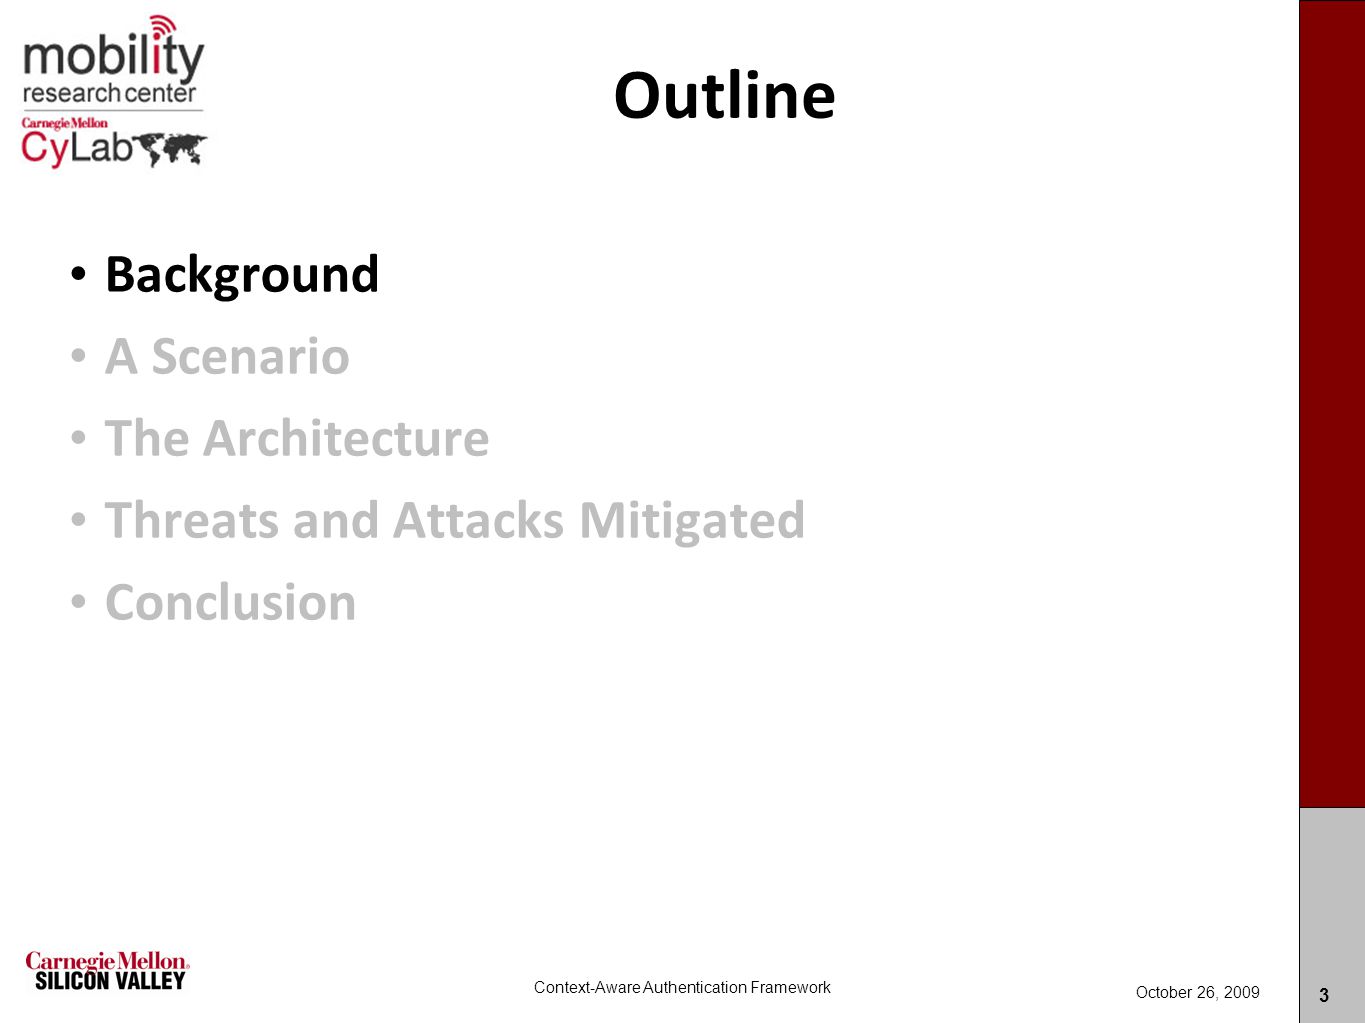 Carnegie MellonCarnegie Mellon Outline Background A Scenario The Architecture Threats and Attacks Mitigated Conclusion 3 Context-Aware Authentication Framework October 26, 2009